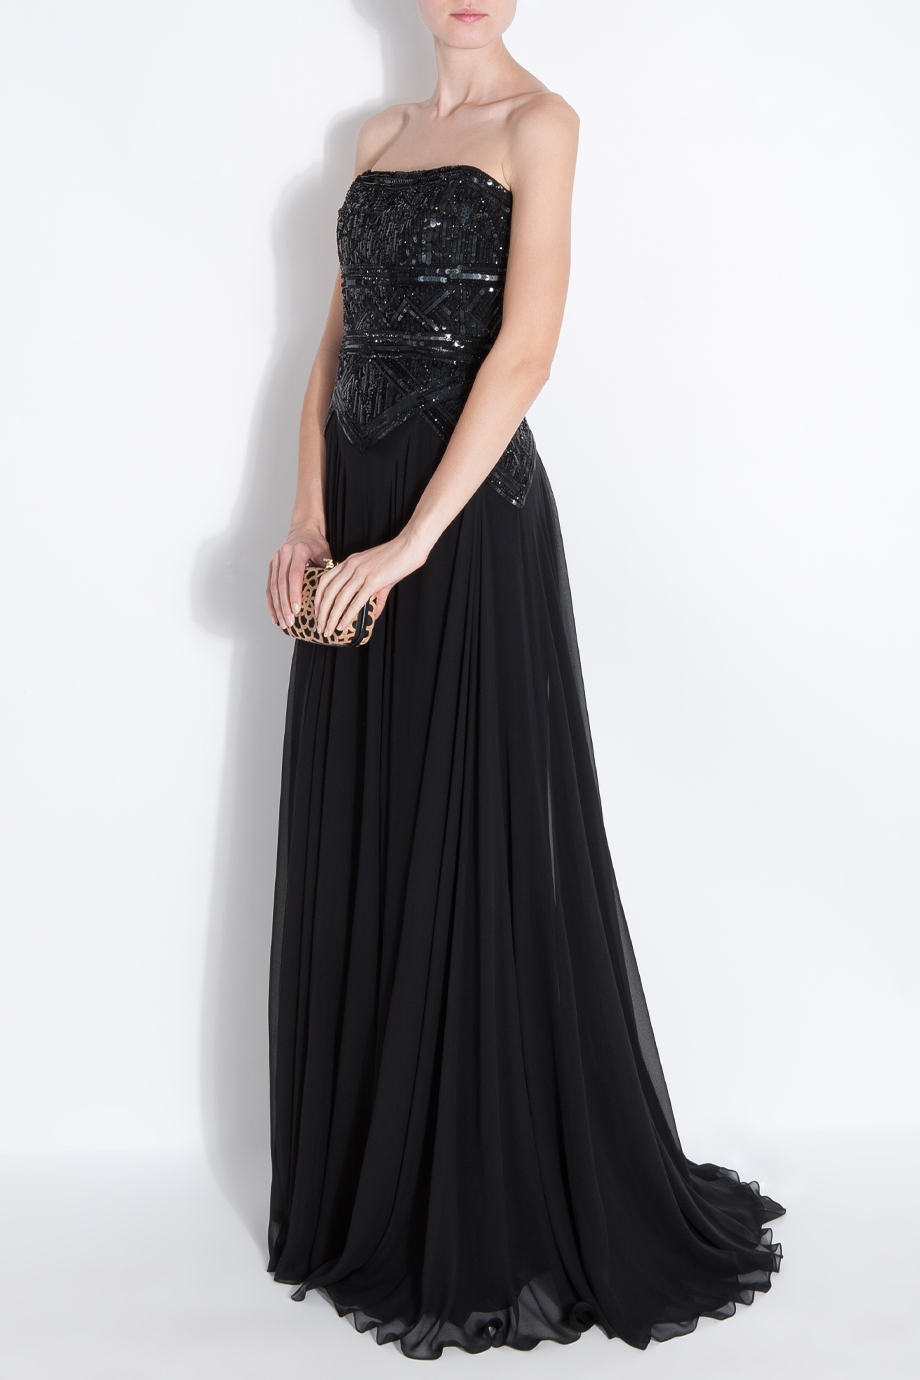 Elie saab Strapless 12 Beaded Gown in Black | Lyst